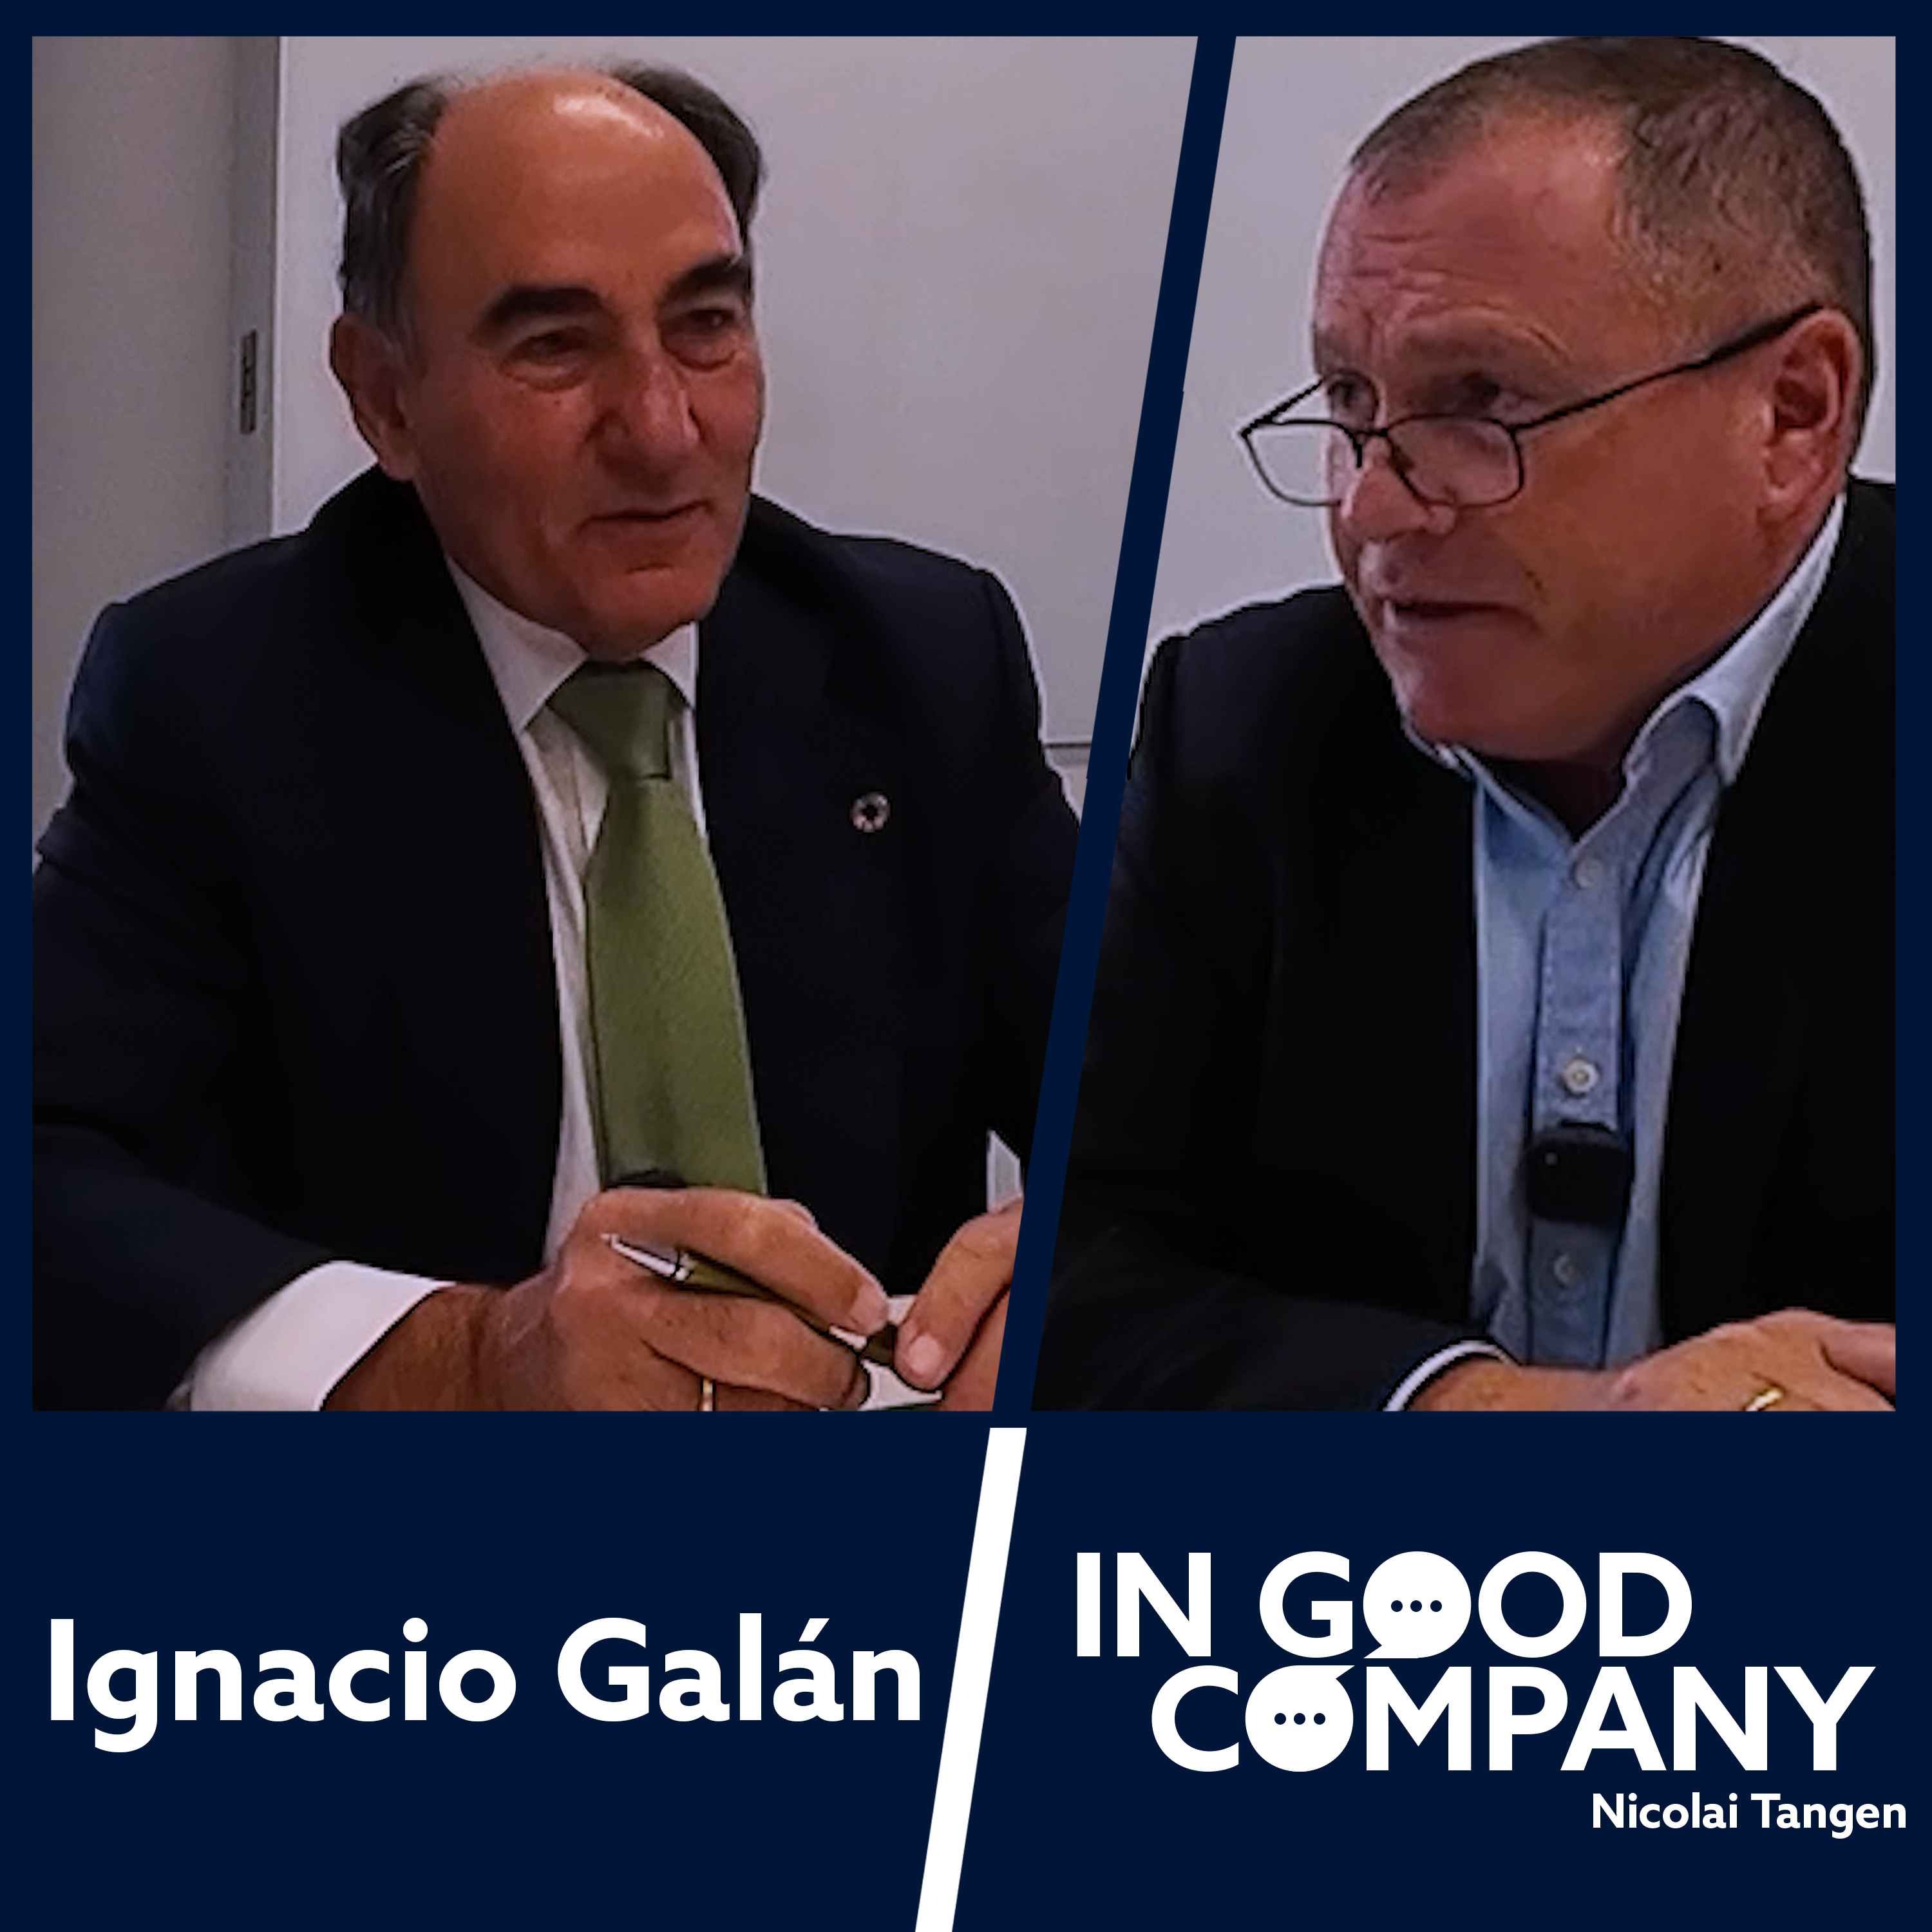 Ignacio Galán Chair of Iberdrola: Energy transition, permits, speed and values.